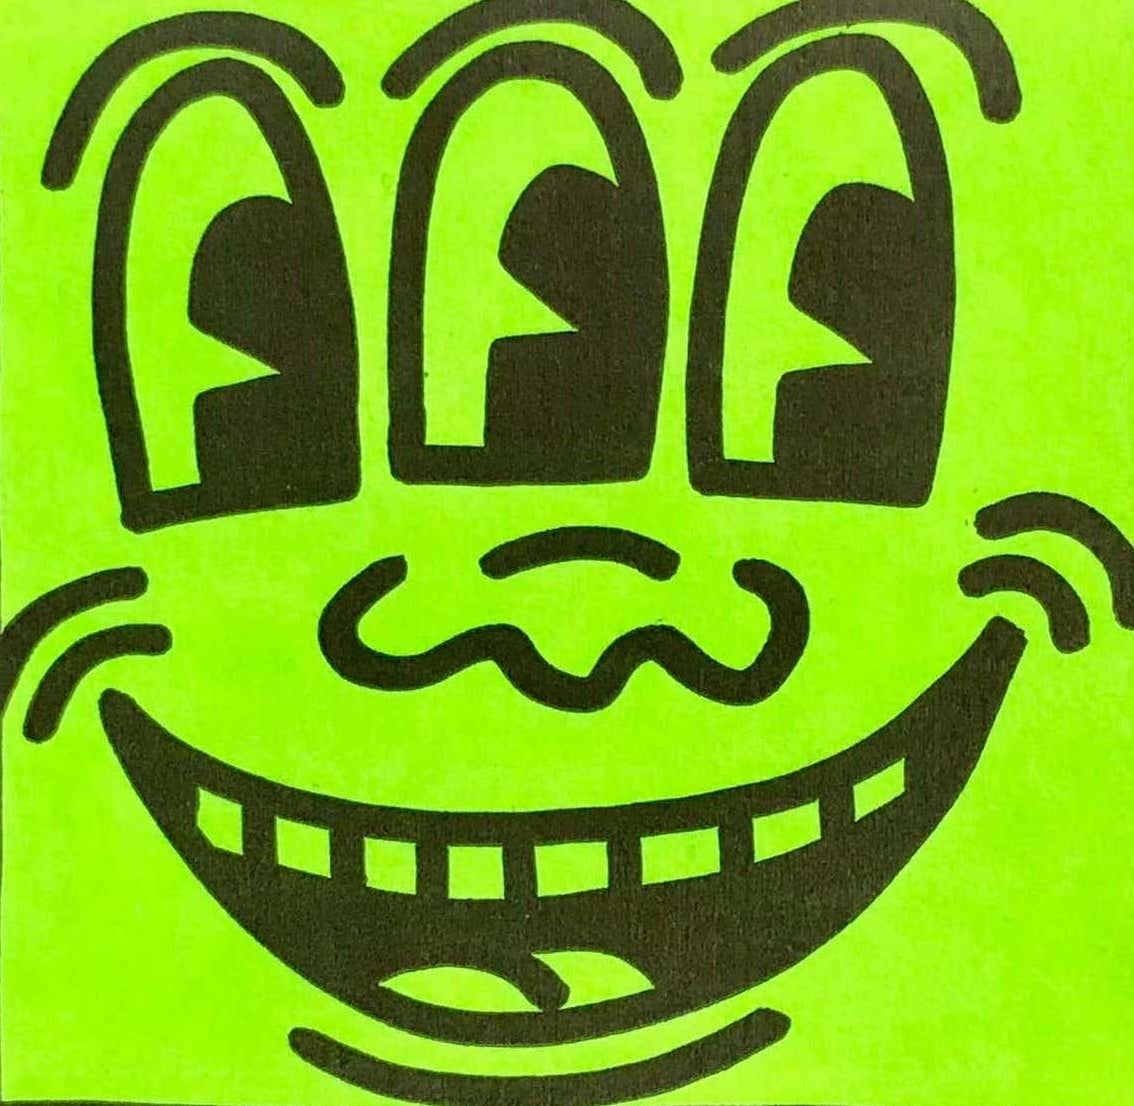 Keith Haring, années 1980, autocollant « Haring early 80s » à trois yeux souriants  en vente 2